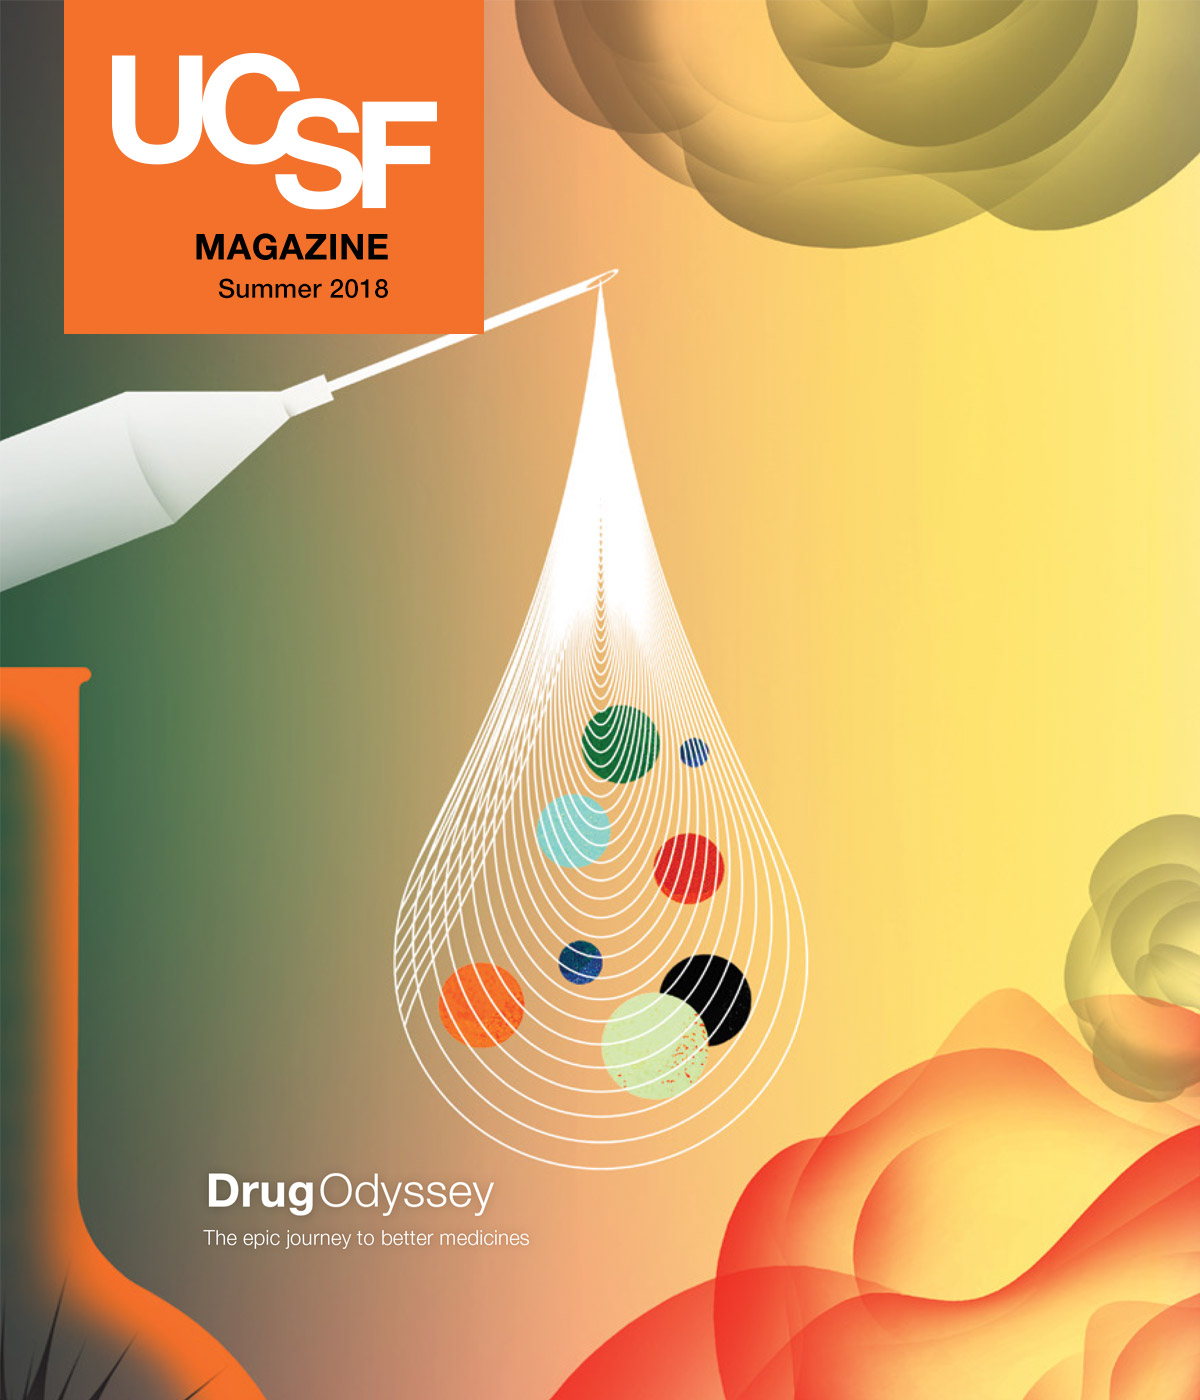 Cover of UCSF Magazine: top left corner reads “UCSF Magazine, Summer 2018”; bottom right reads “Drug Odyssey: The epic journey to better medicines”; illustration on cover: a syringe and needle come from the left; a large dropplet shape comes out of the needle with lines and multi-colored dots within; at the bottom left there is a portion of a beaker; at the top and bottom right, colored amorphous cloud-like shapes drift in from the edges of the page.